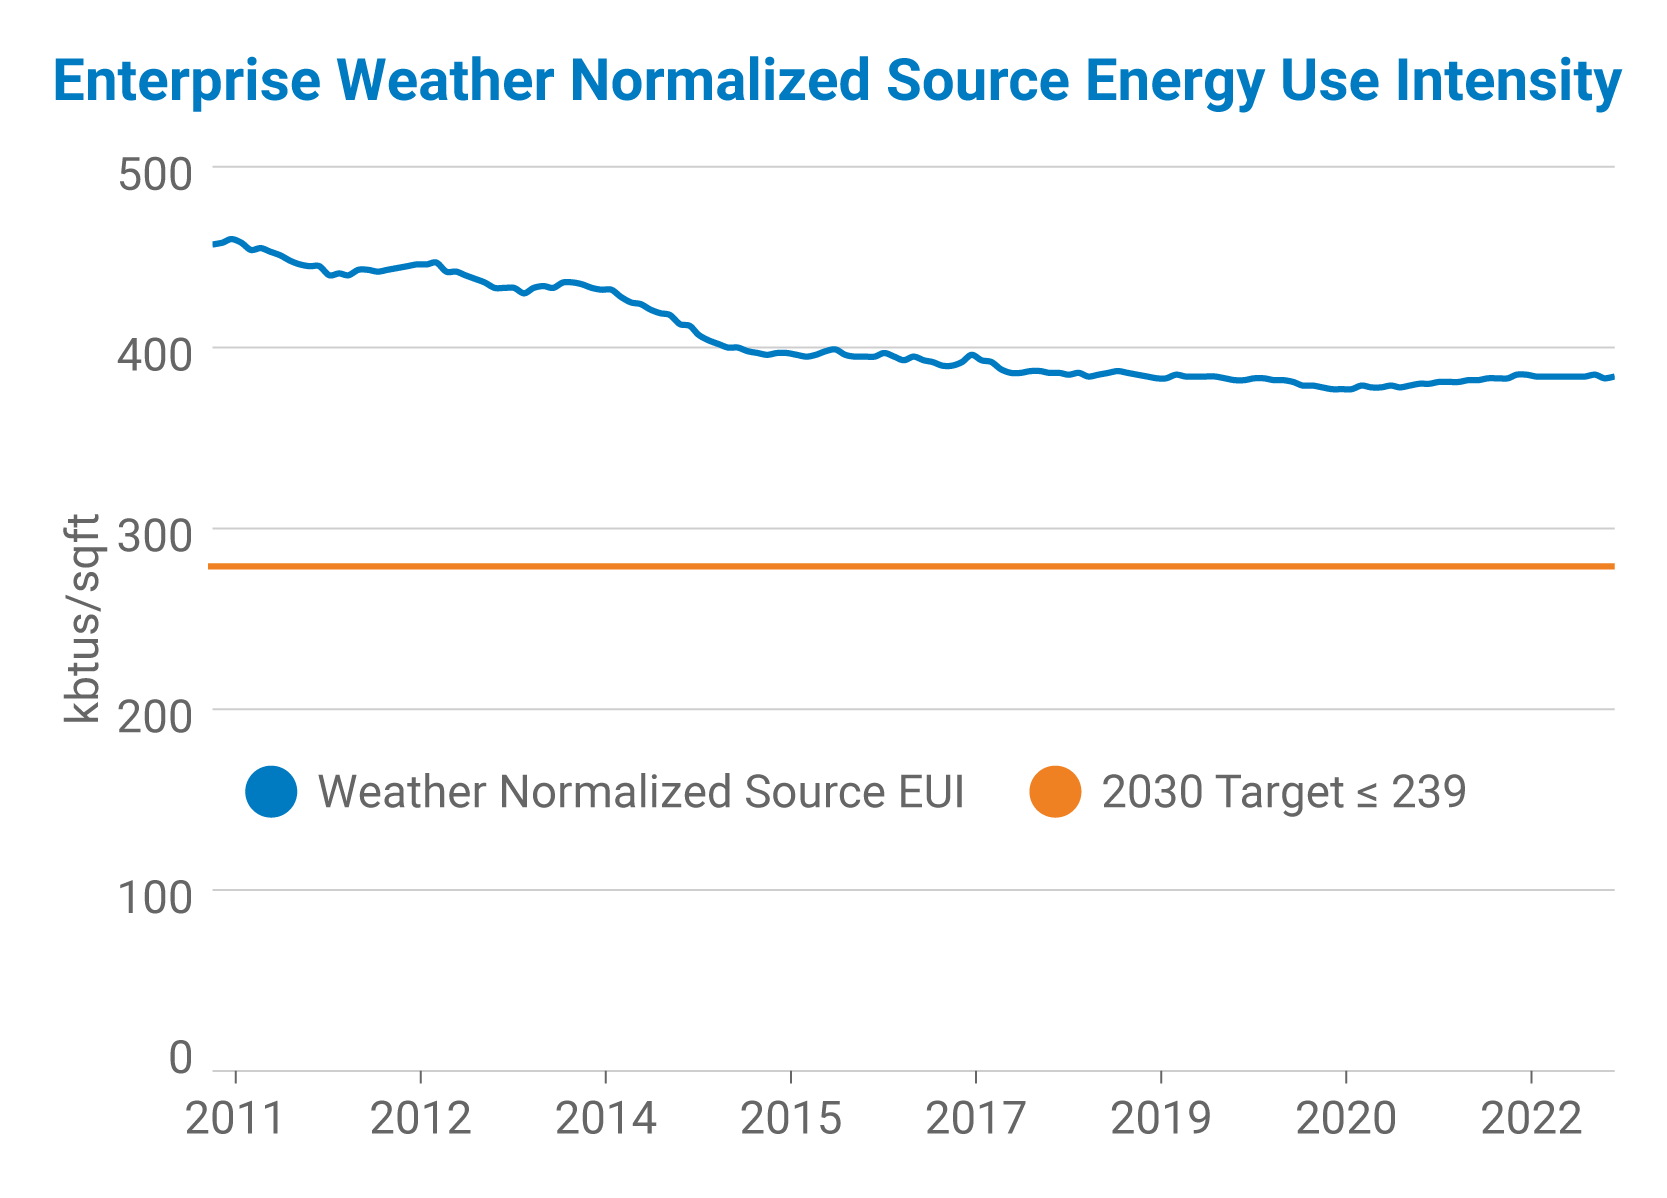 Enterprise weather normalized source energy use intensity graph